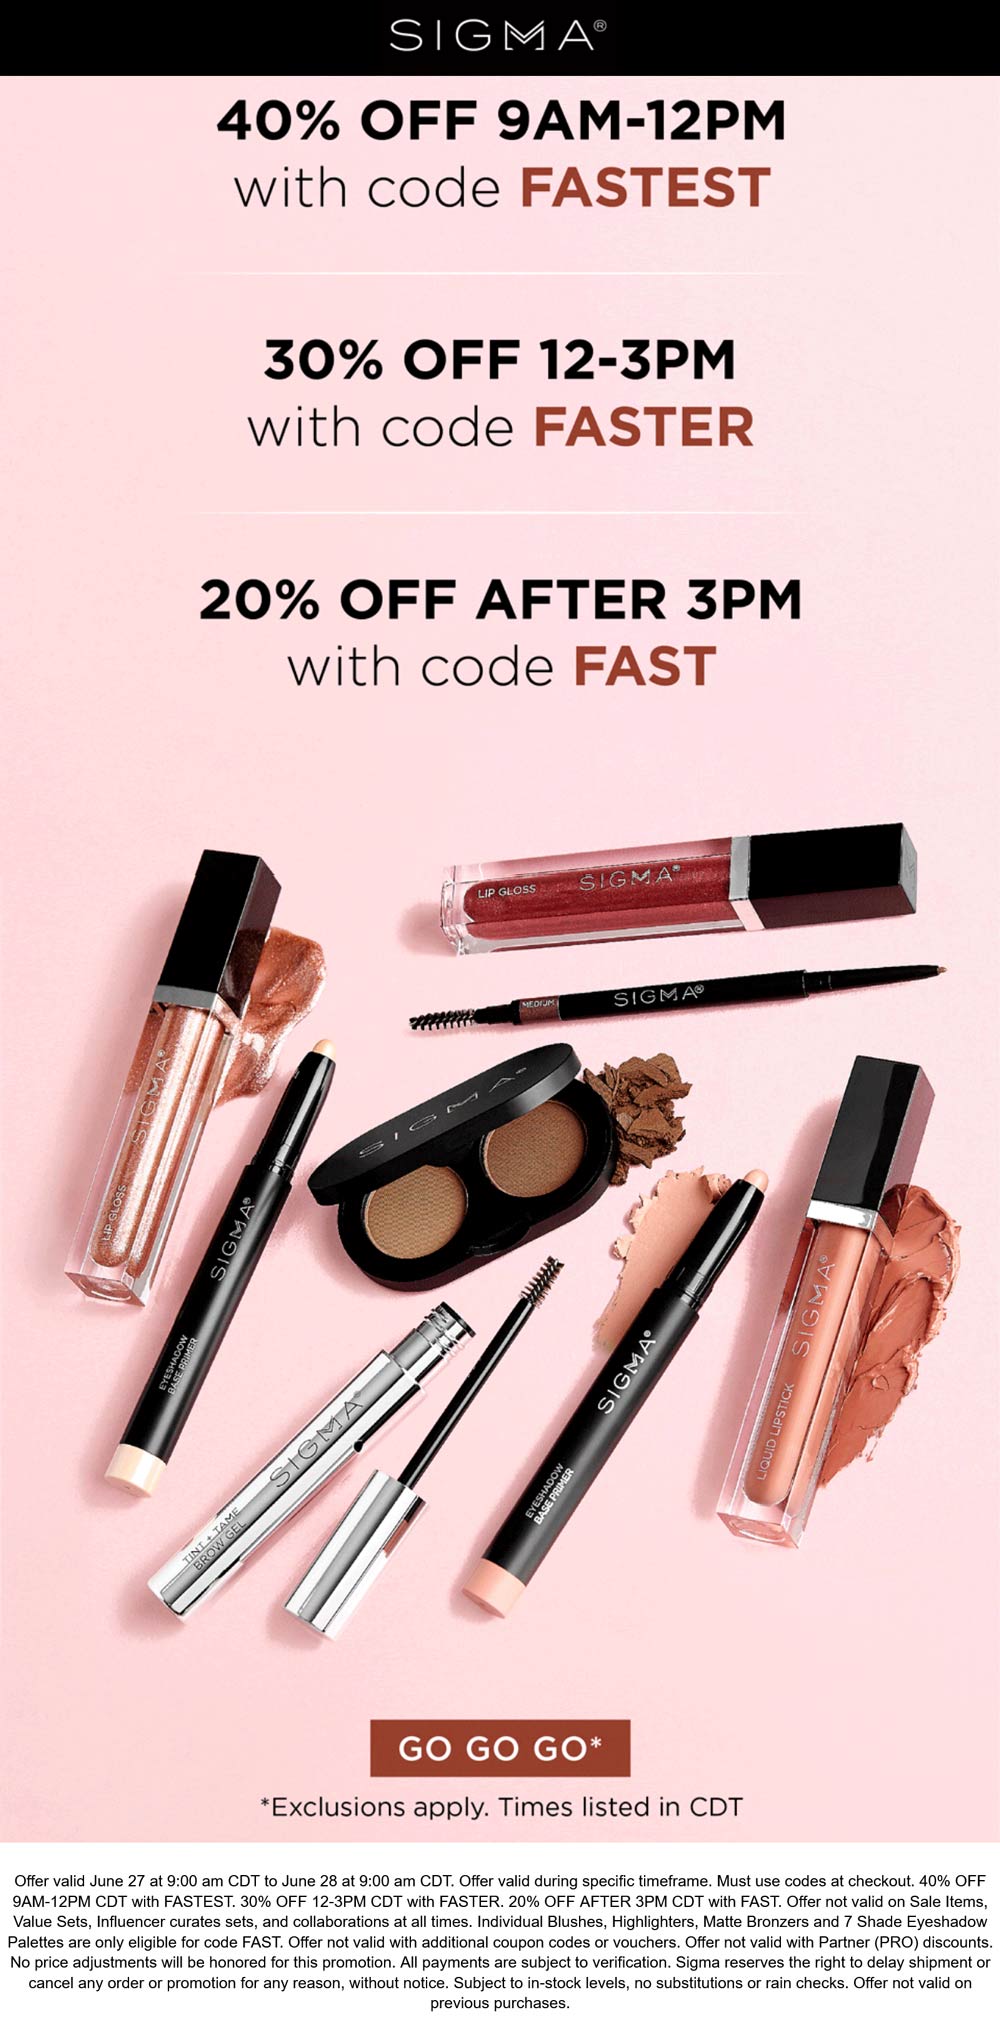 Sigma stores Coupon  20-40% off today at Sigma beauty via promo code FASTEST #sigma 